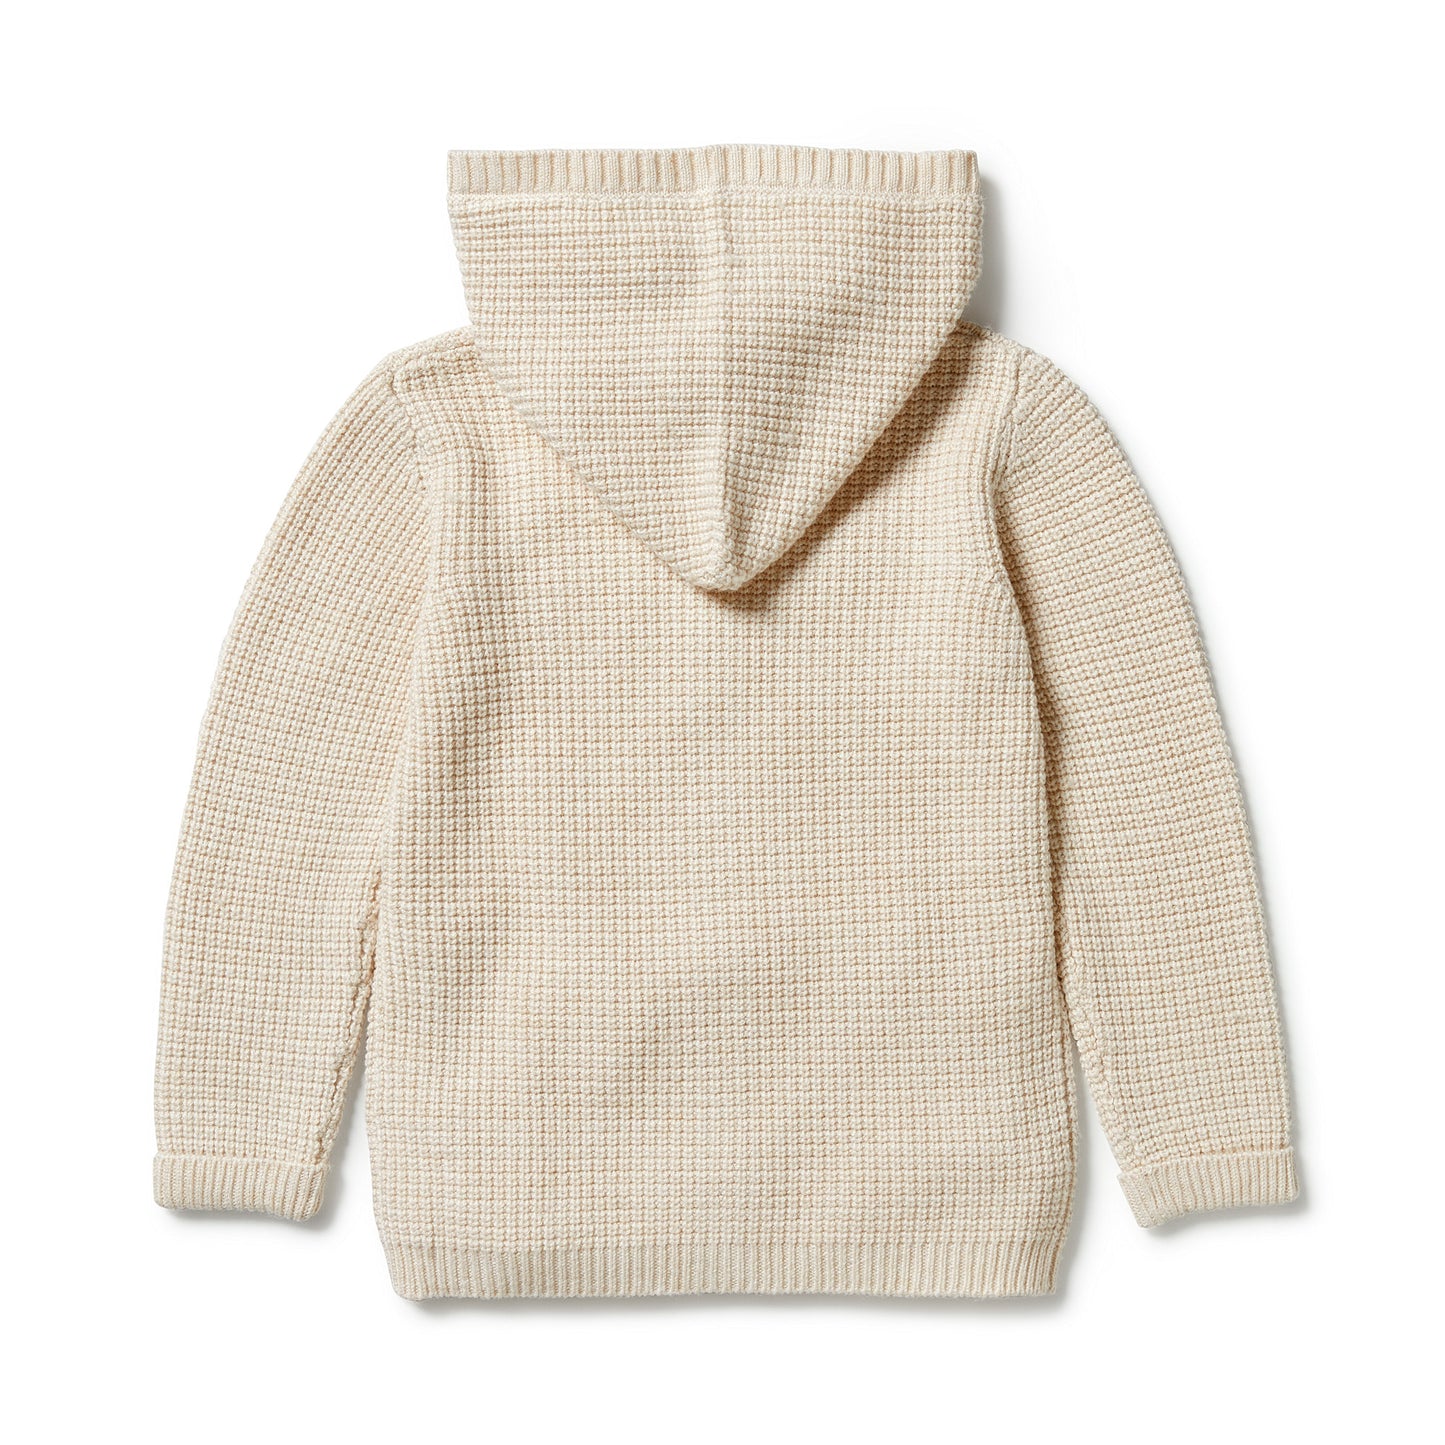 Wilson & Frenchy Knitted Button Jacket - Sand Melange